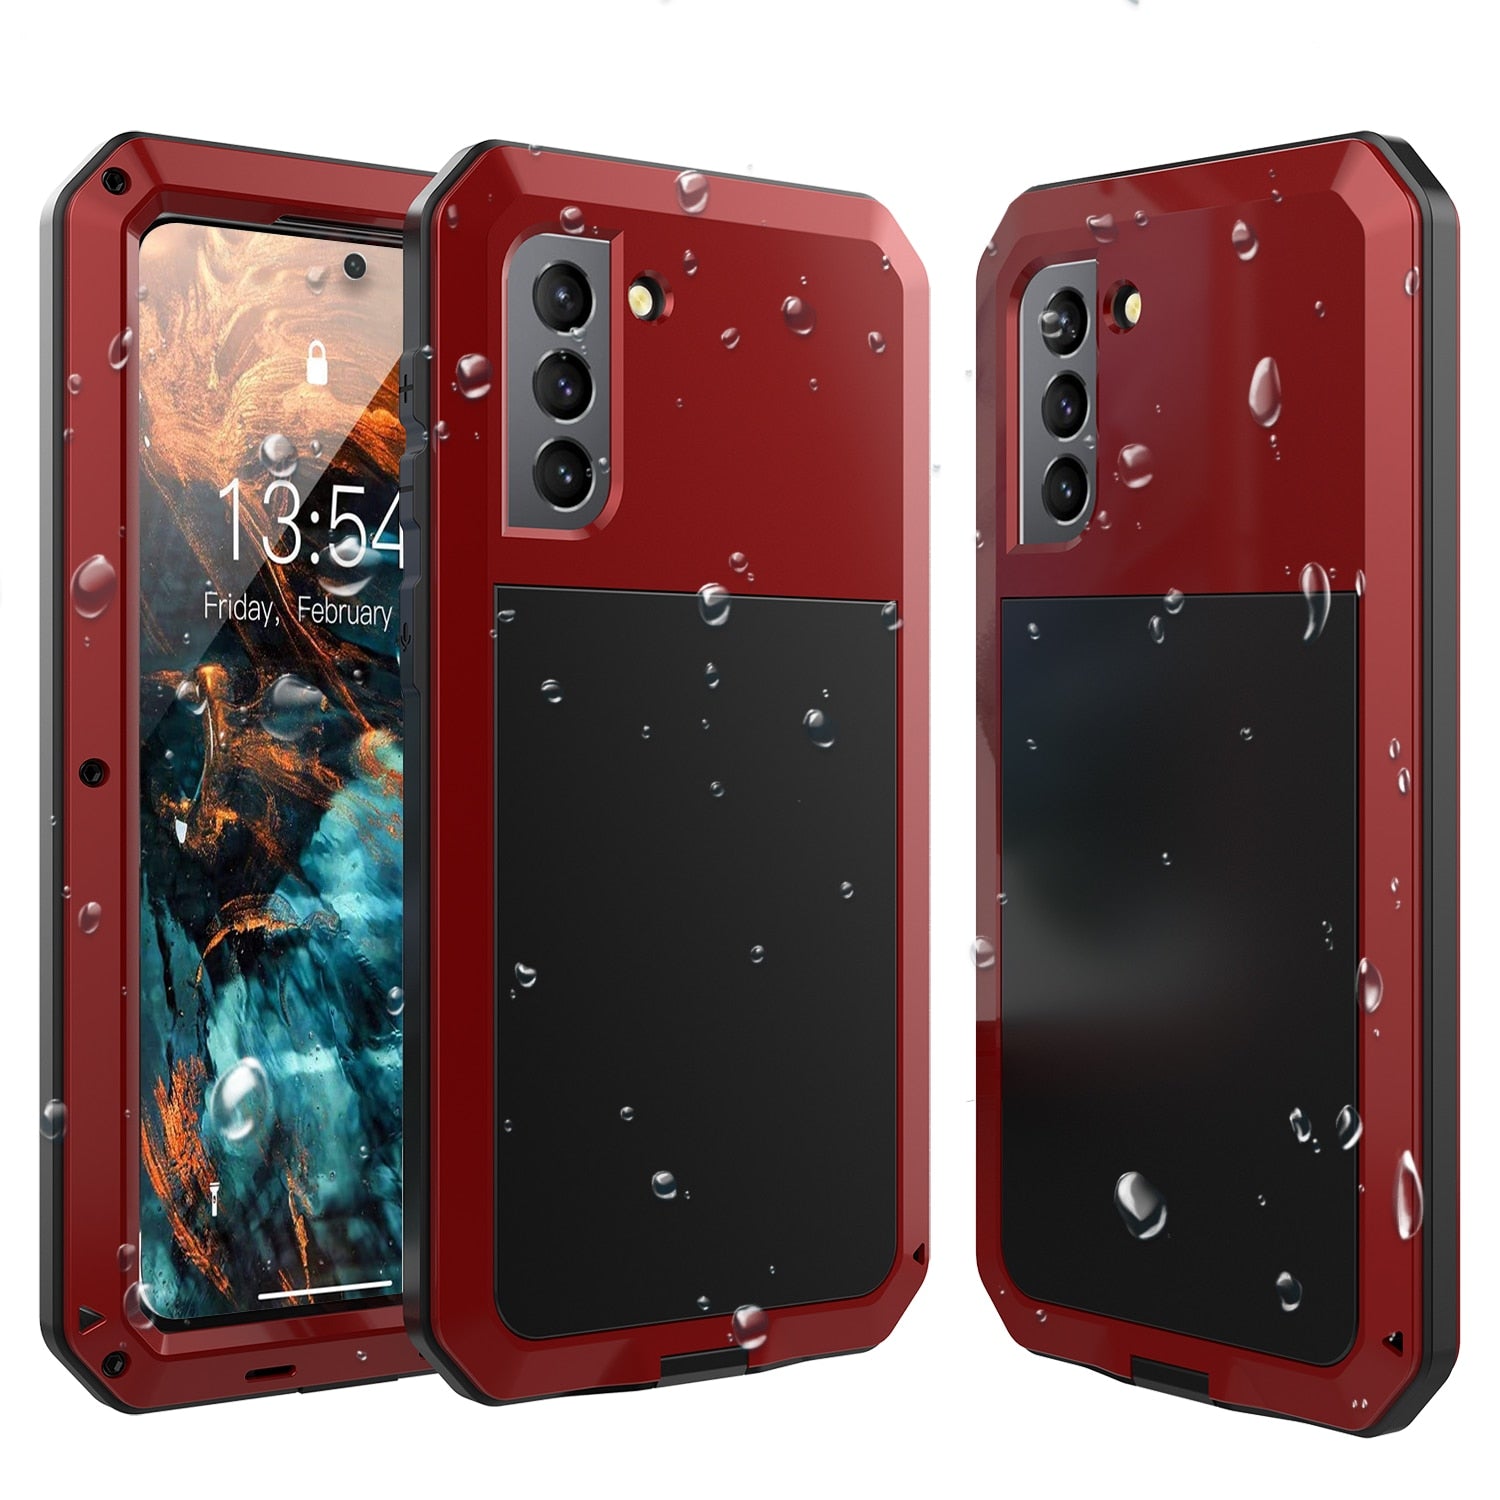 Armor Tank Aluminum Metal Shockproof Military Heavy Duty Phone Cases For Samsung Galaxy S21/S21 Plus Case Waterproof Cover - 380230 Find Epic Store